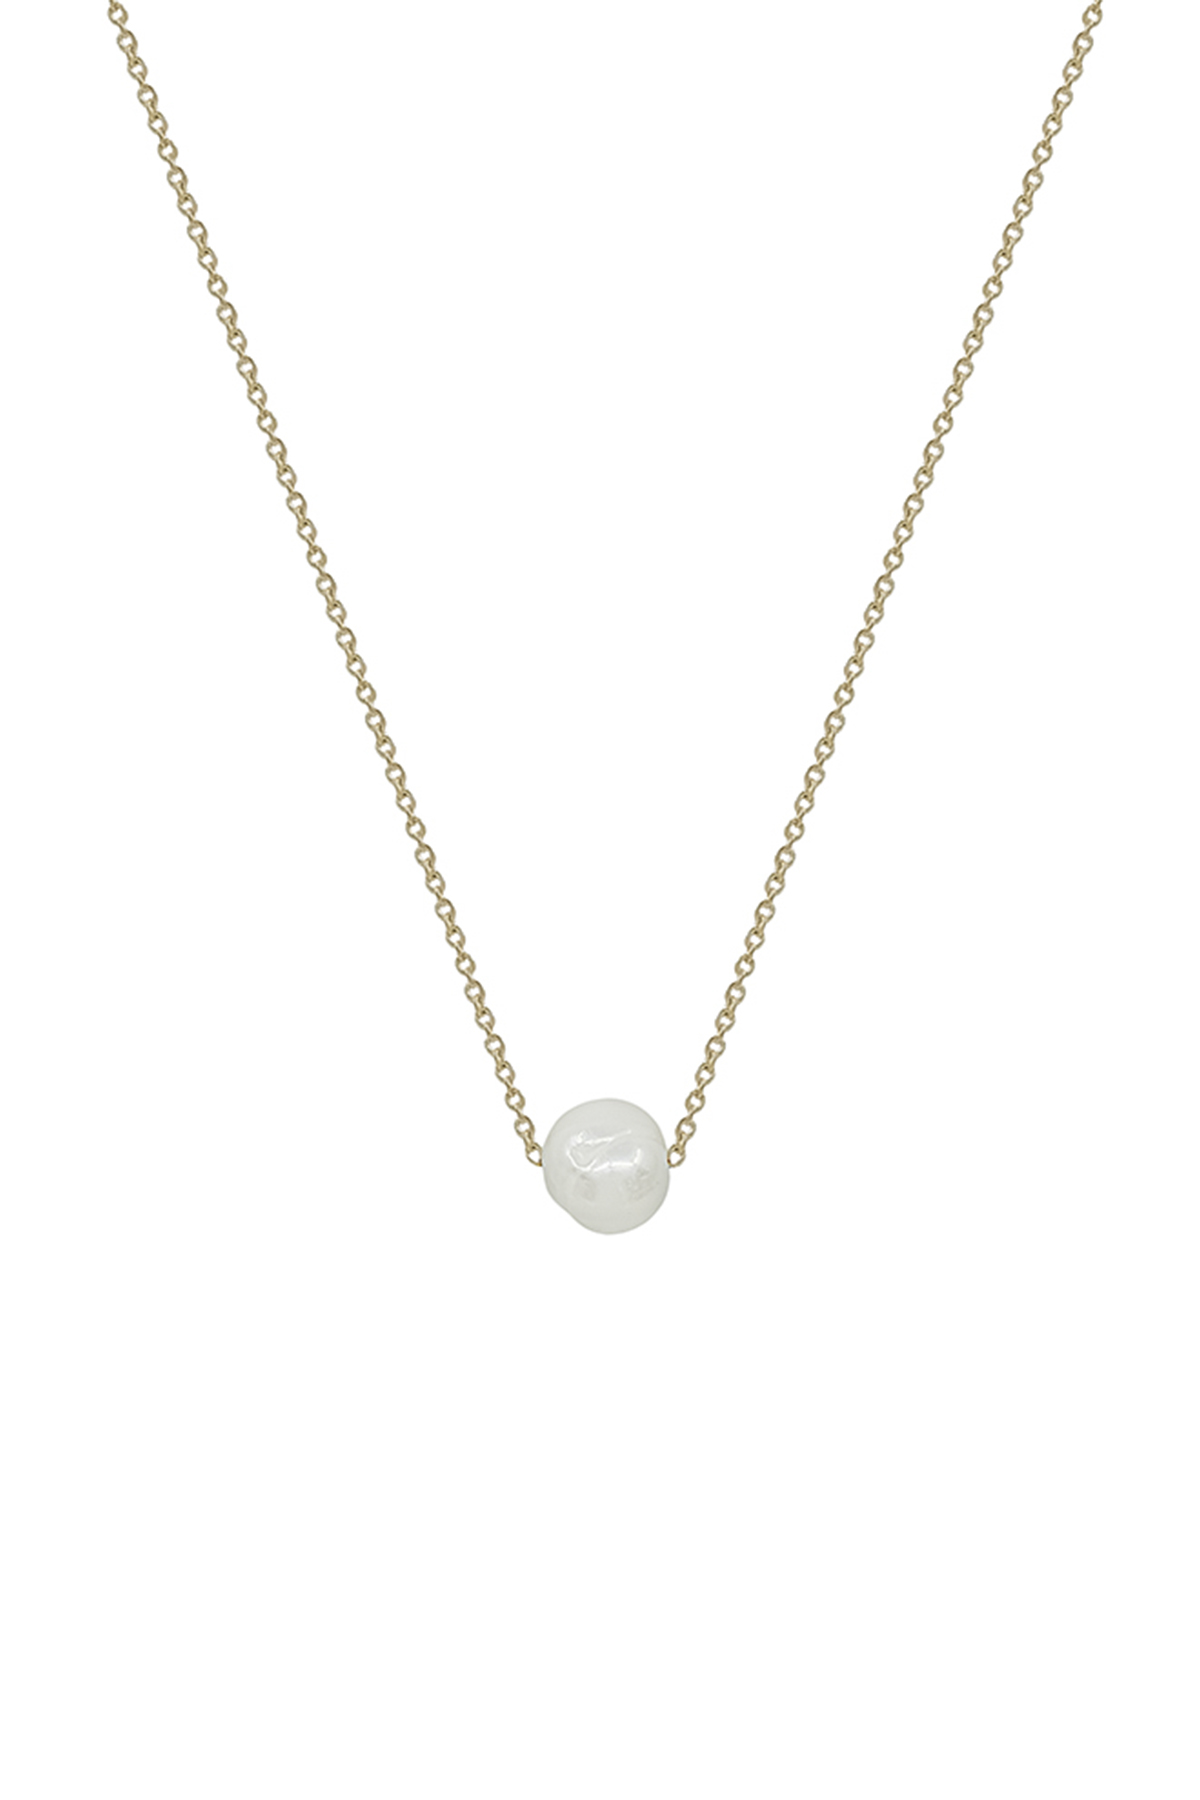 10MM FRESHWATER PEARL CHAIN THRU NECKLACE